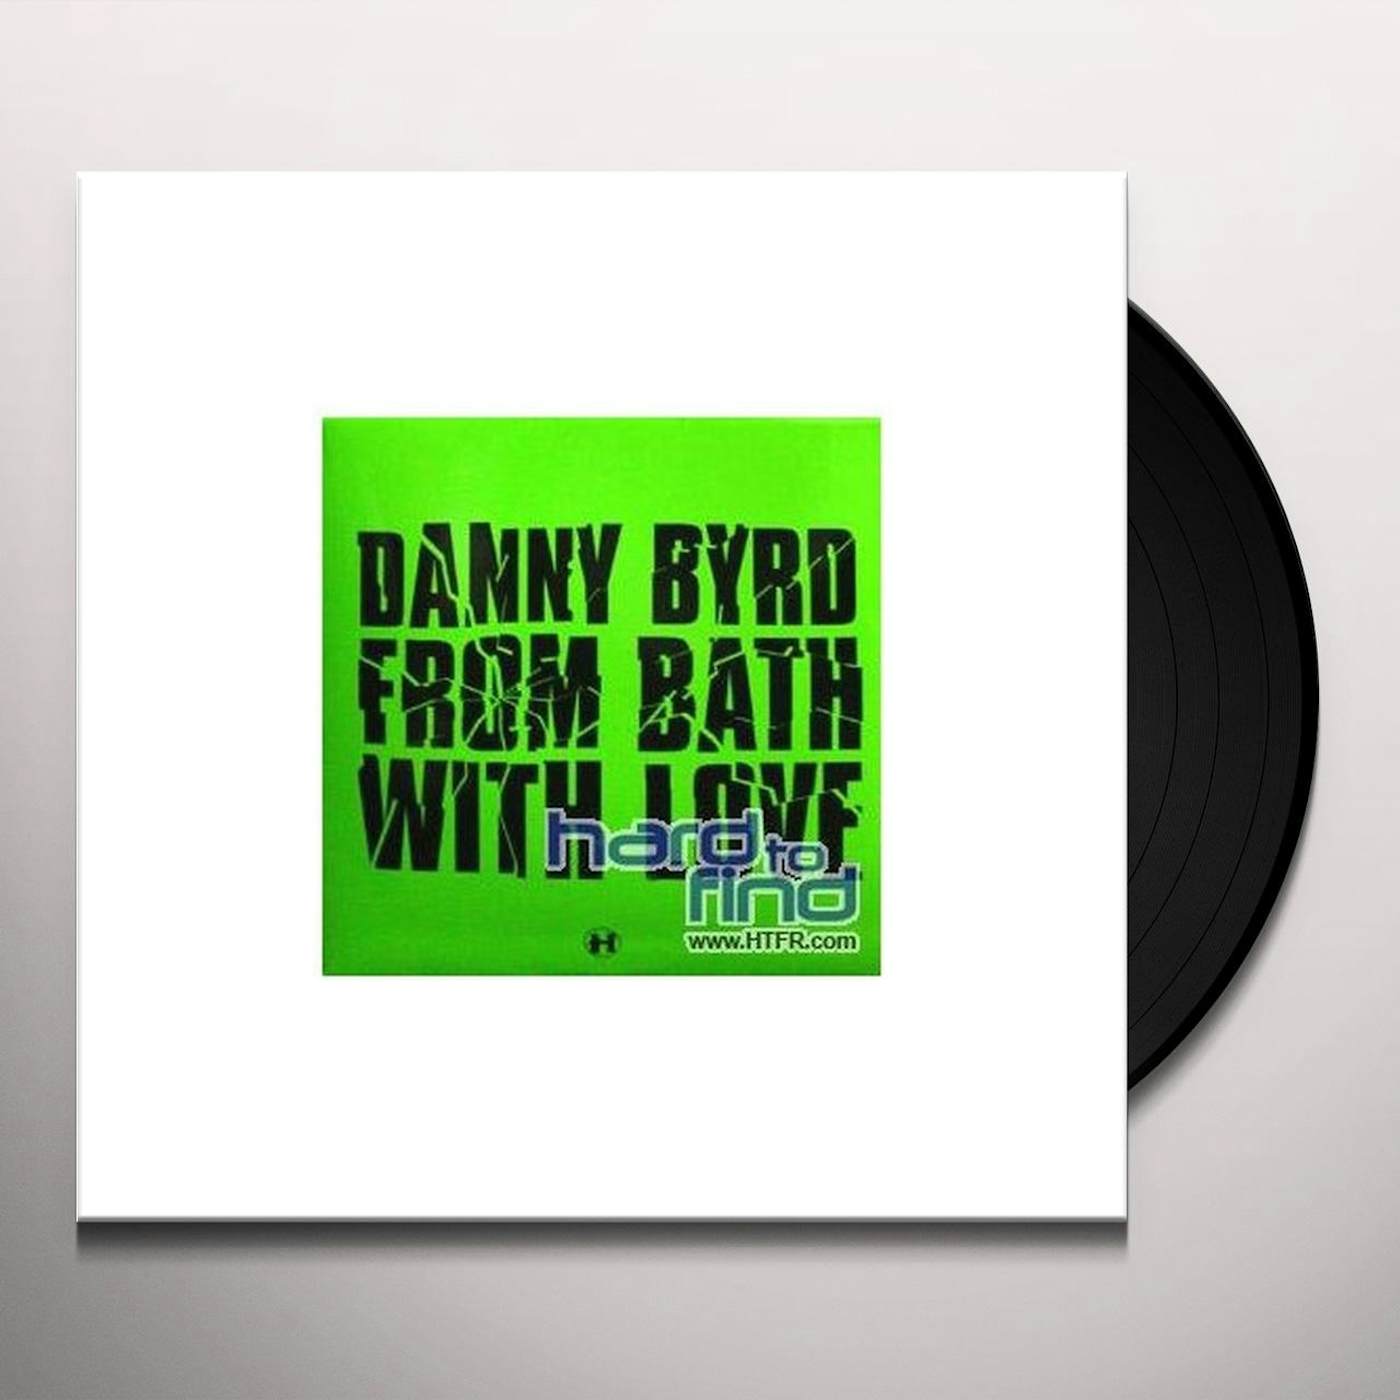 Danny Byrd FROM BATH WITH LOVE/SHOCK OUT VIP Vinyl Record